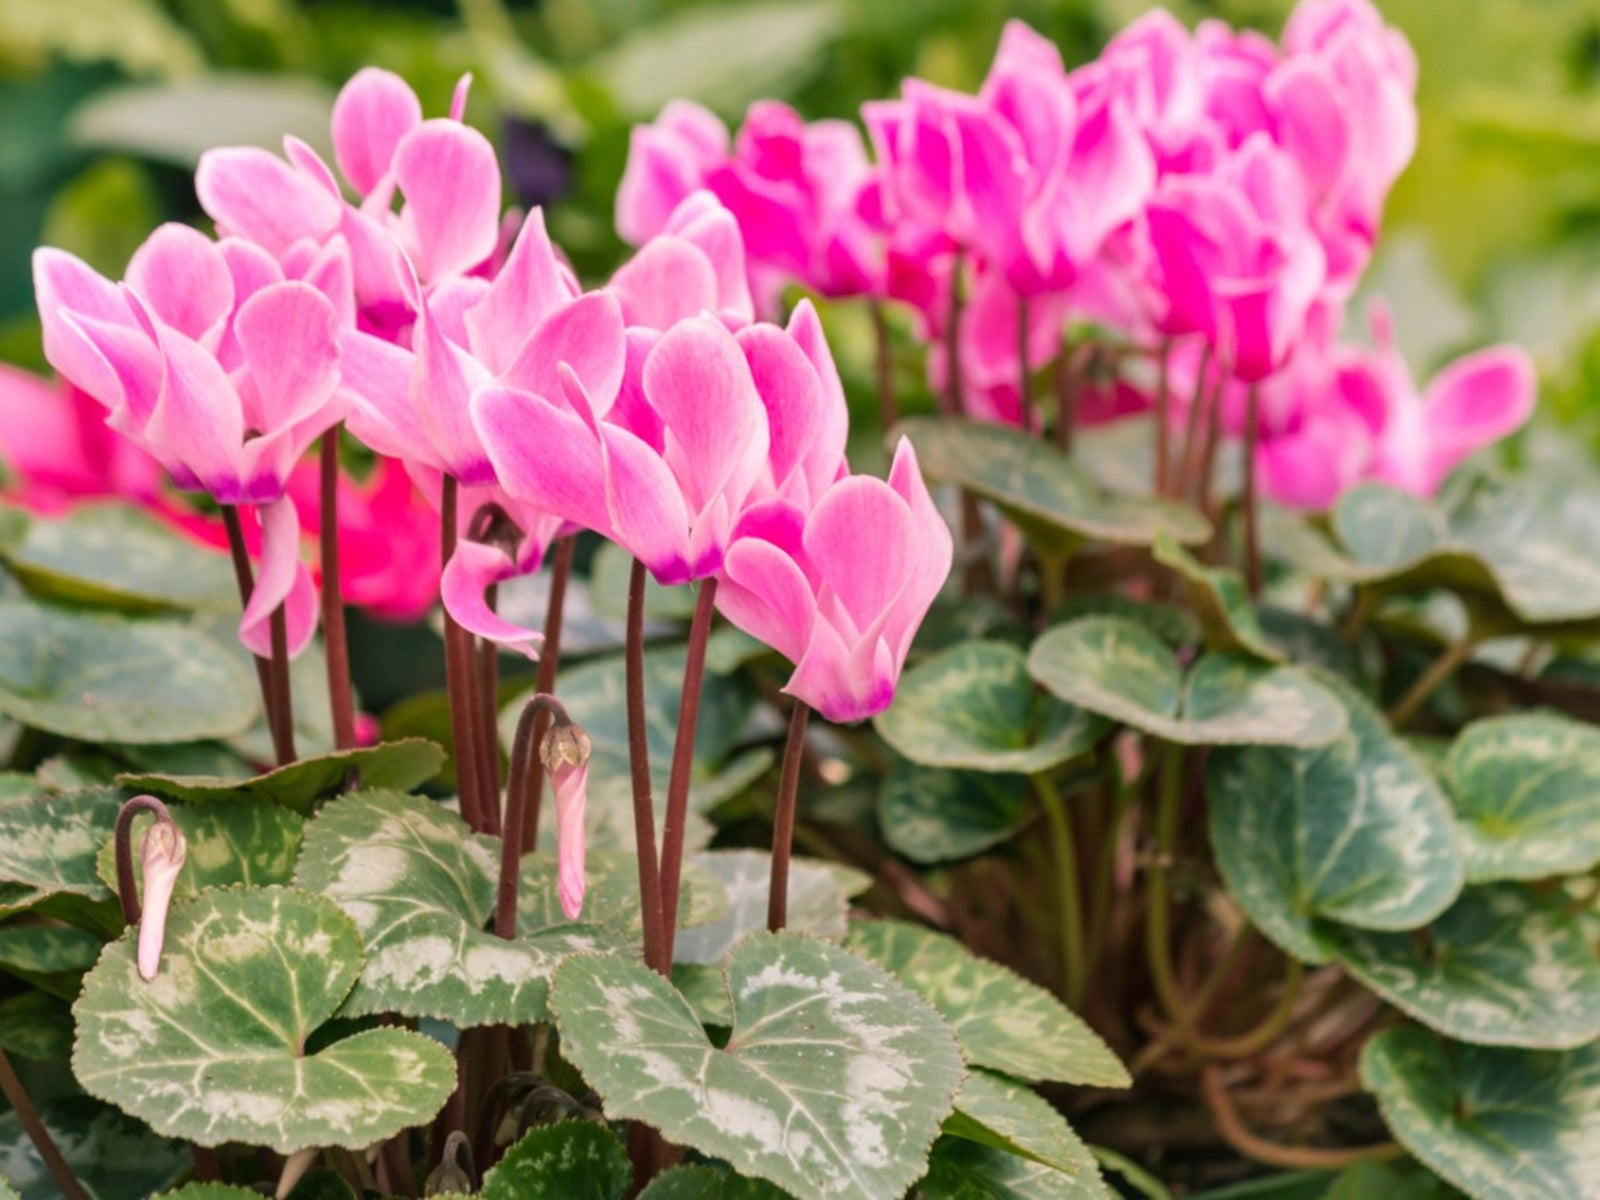 Cyclamen Care: How To Take Care Of Cyclamen Plants